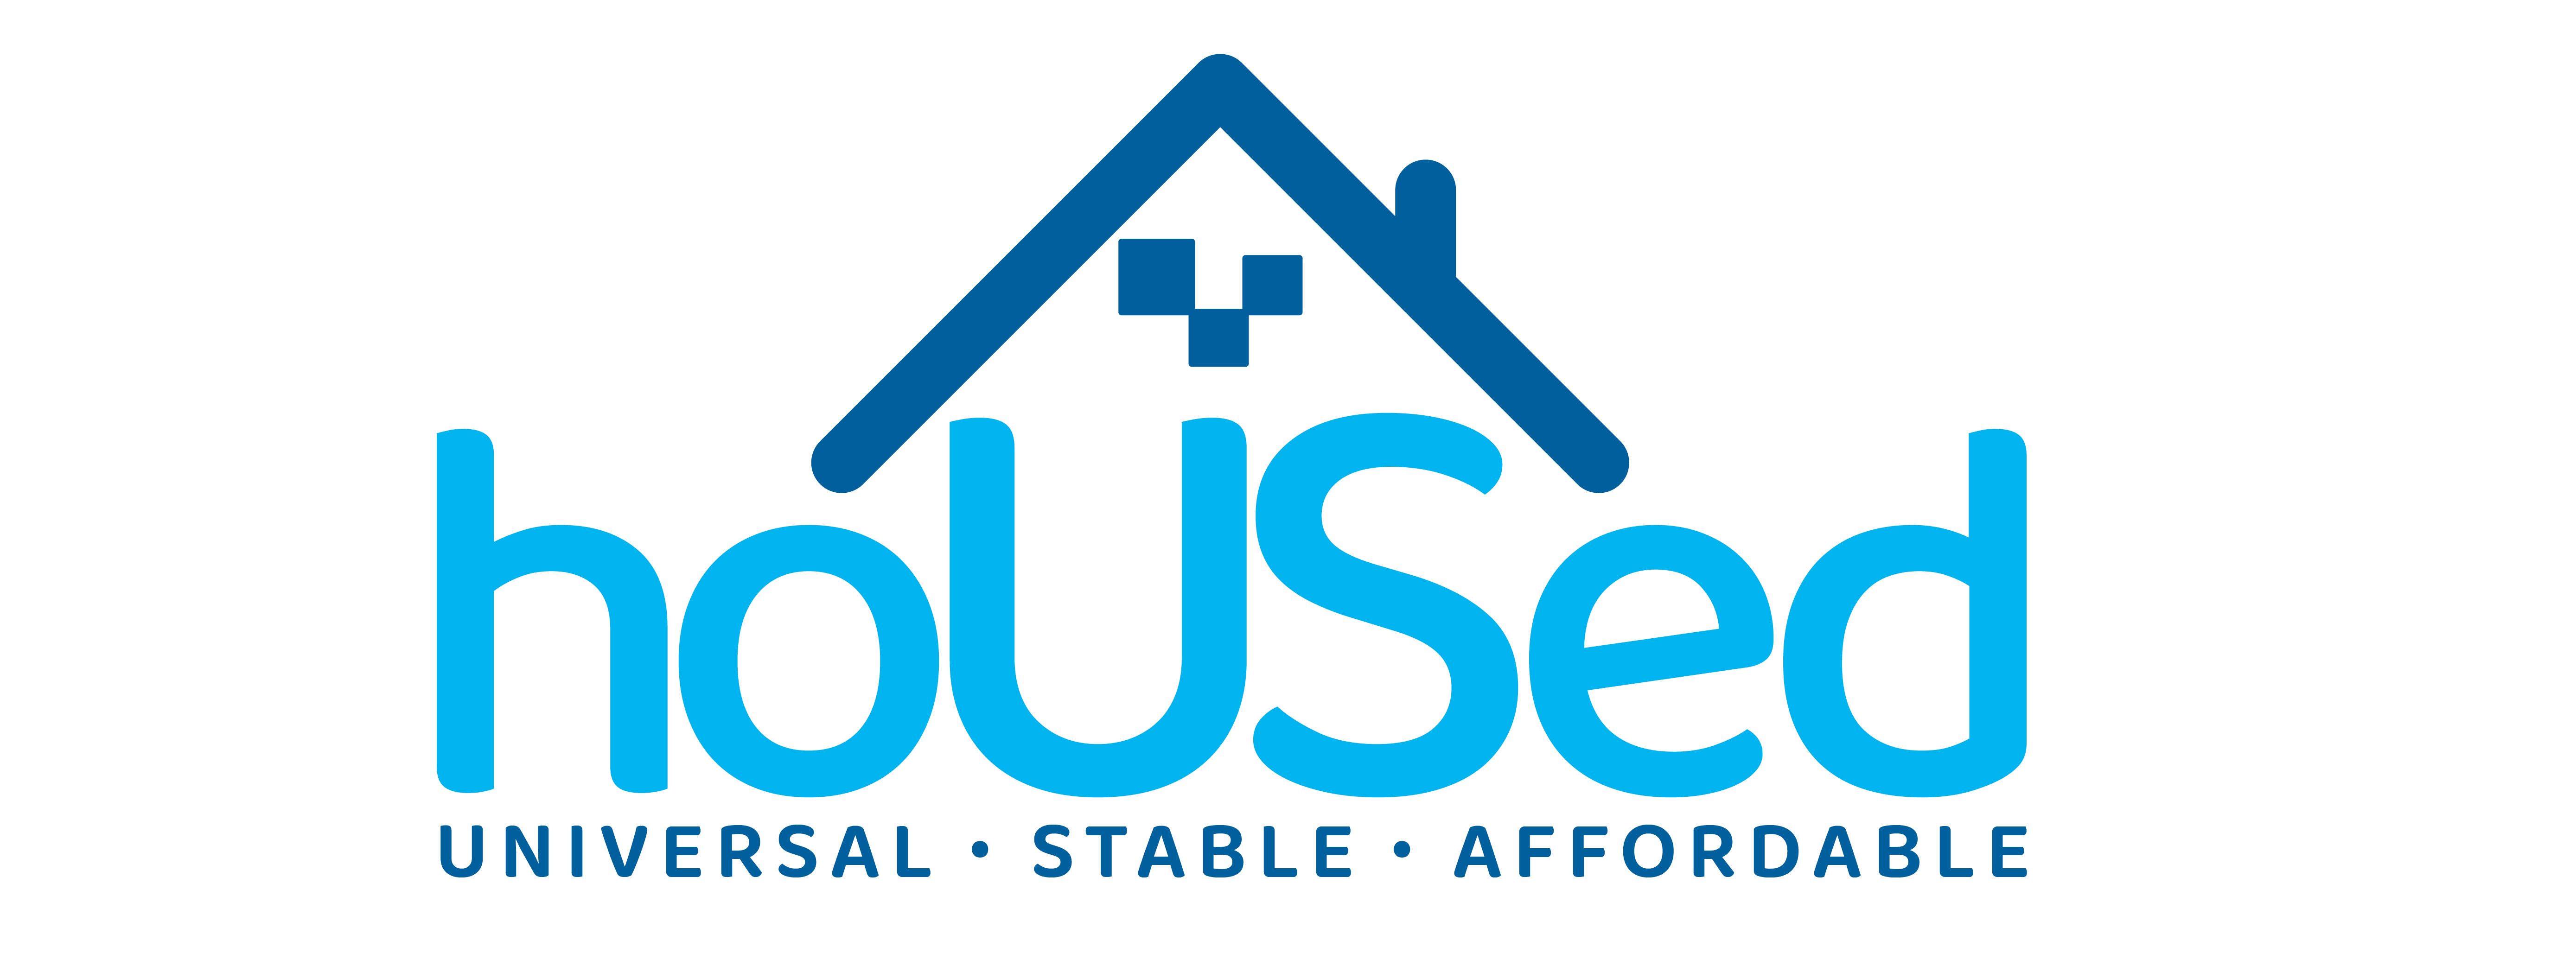 official housed logo